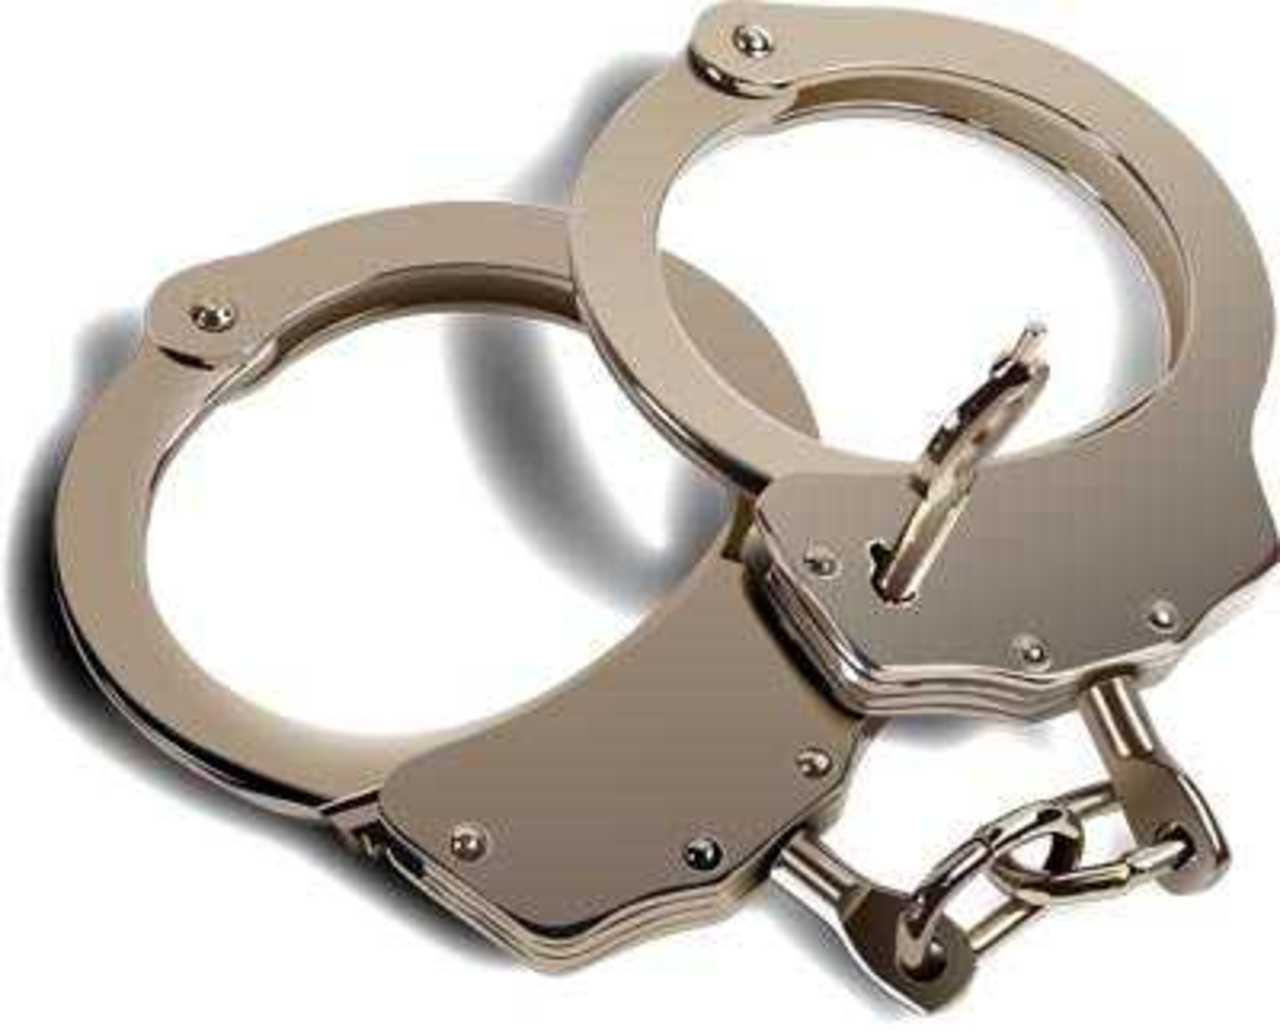 Three escapees re-arrested in Mount Frere breakout